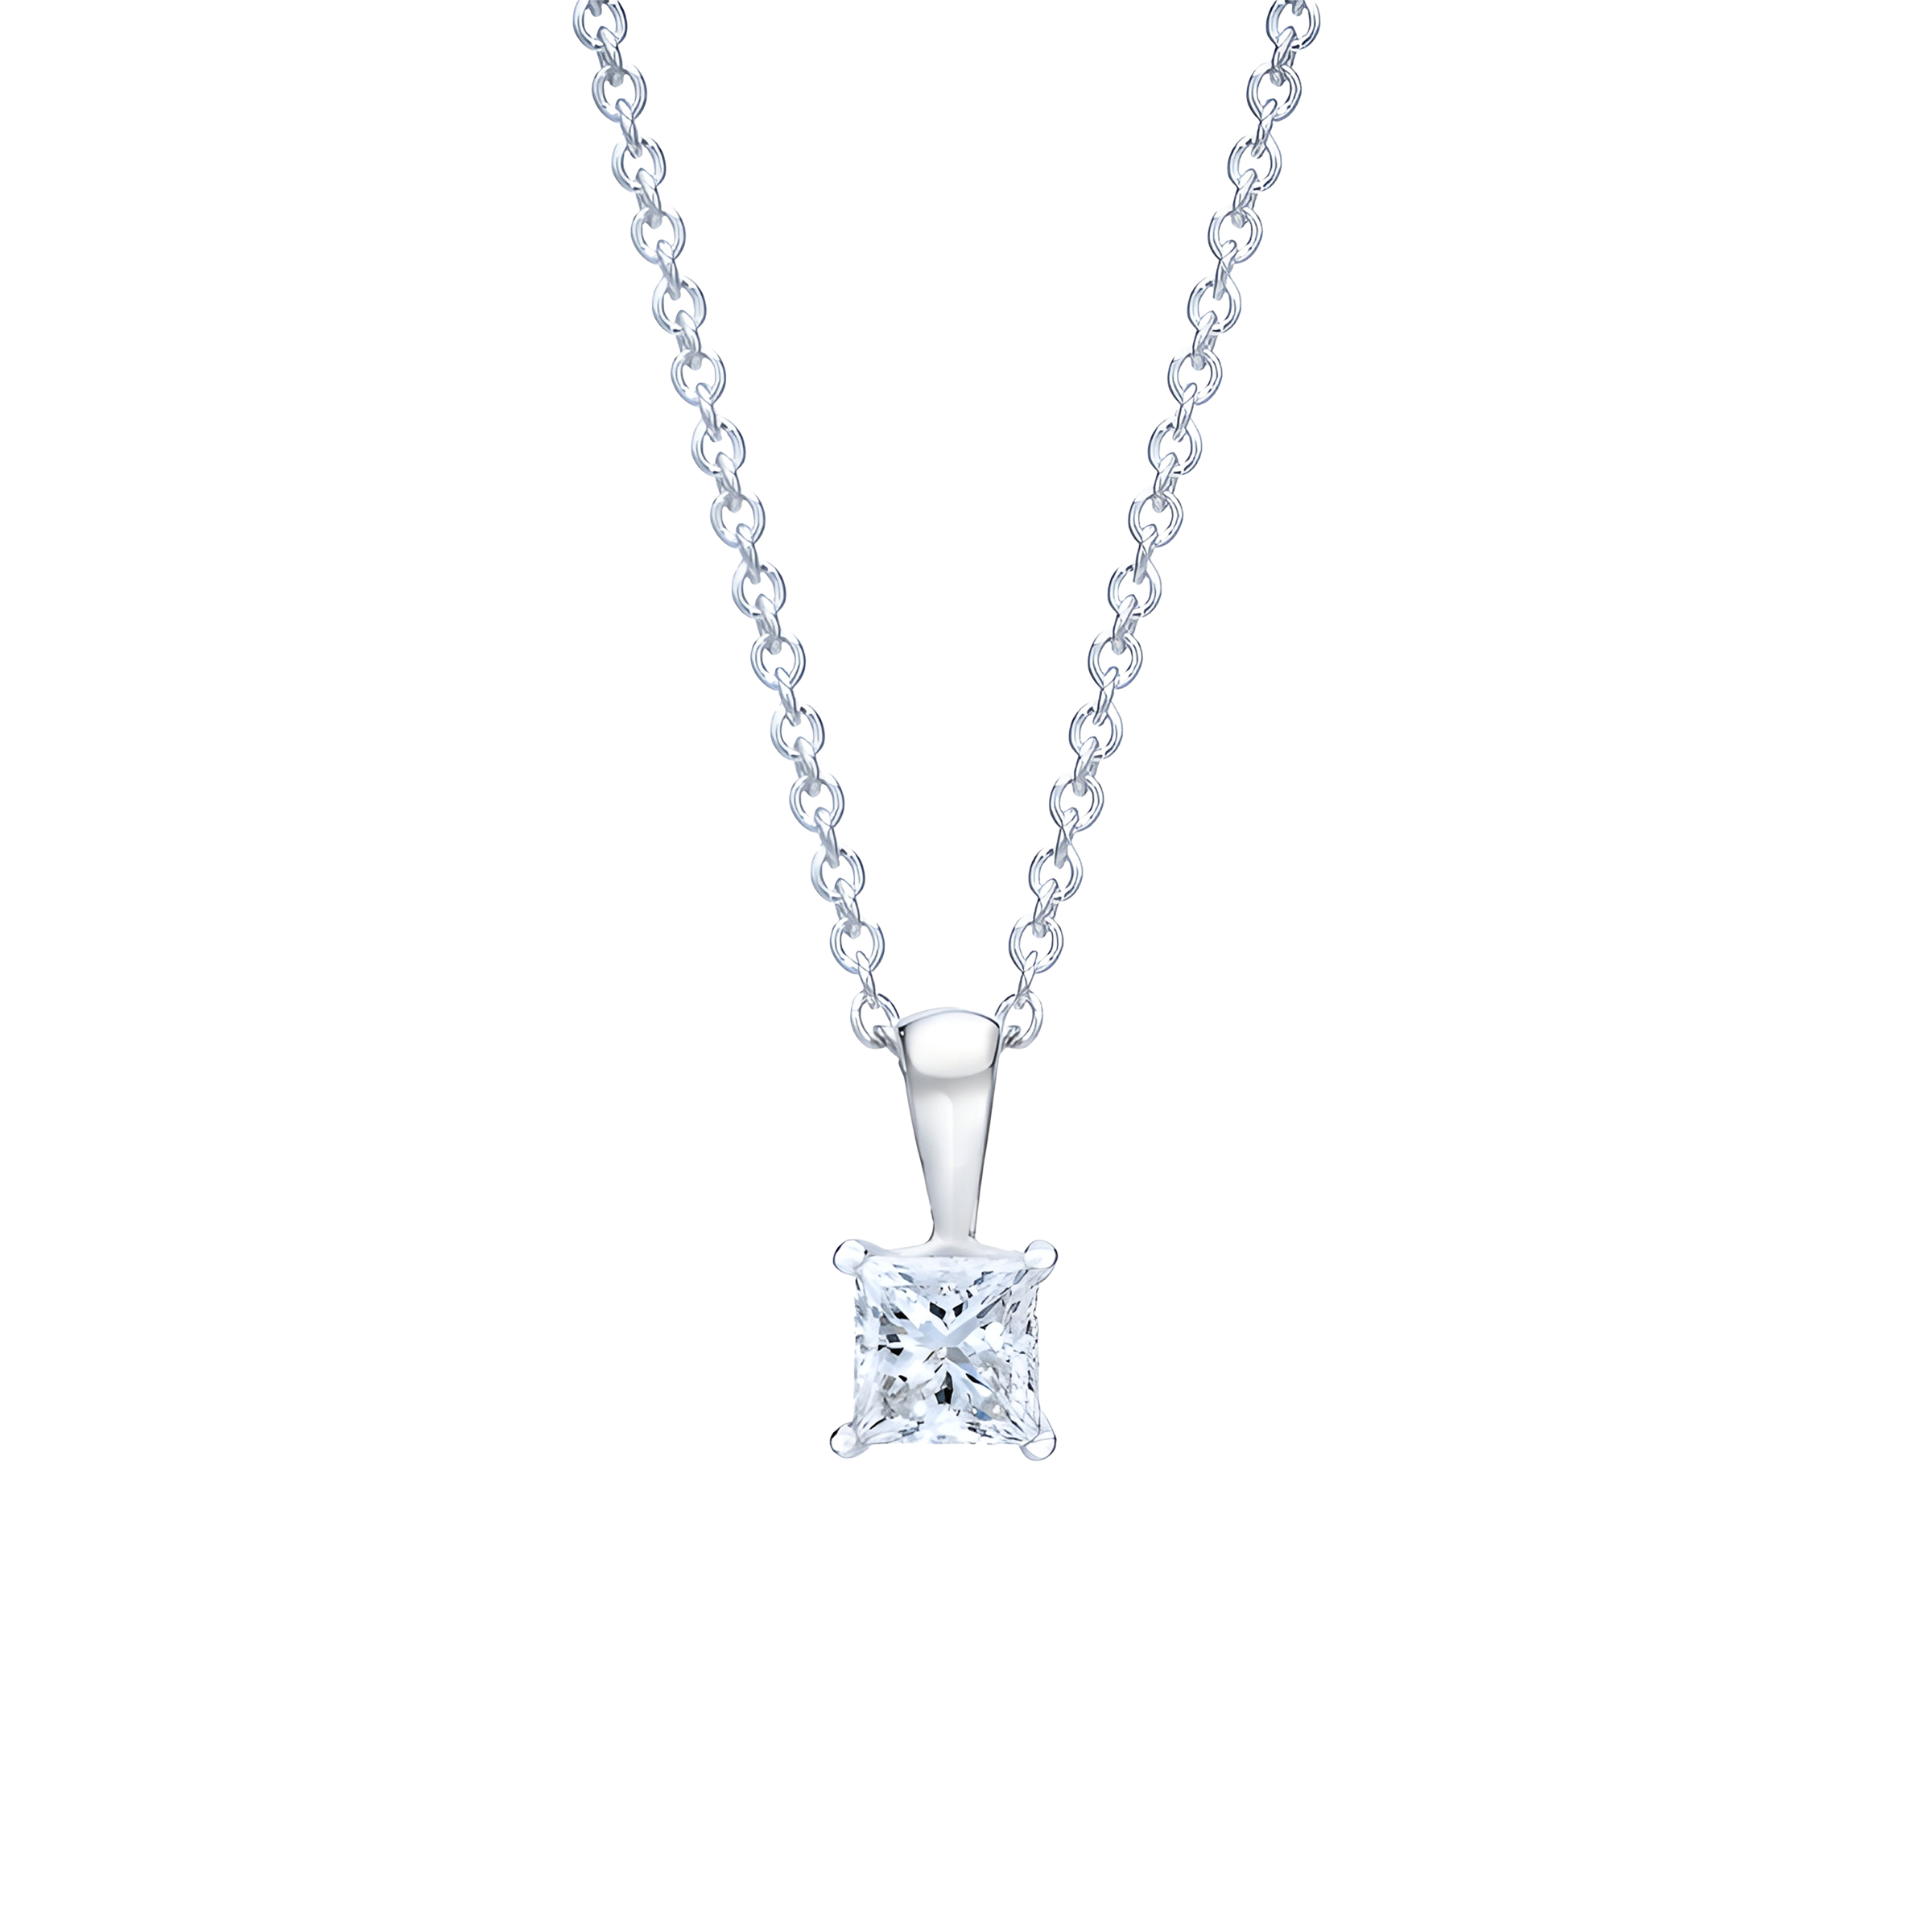 Princess Cut Solitaire Diamond Pendent Necklace in 18k White Gold